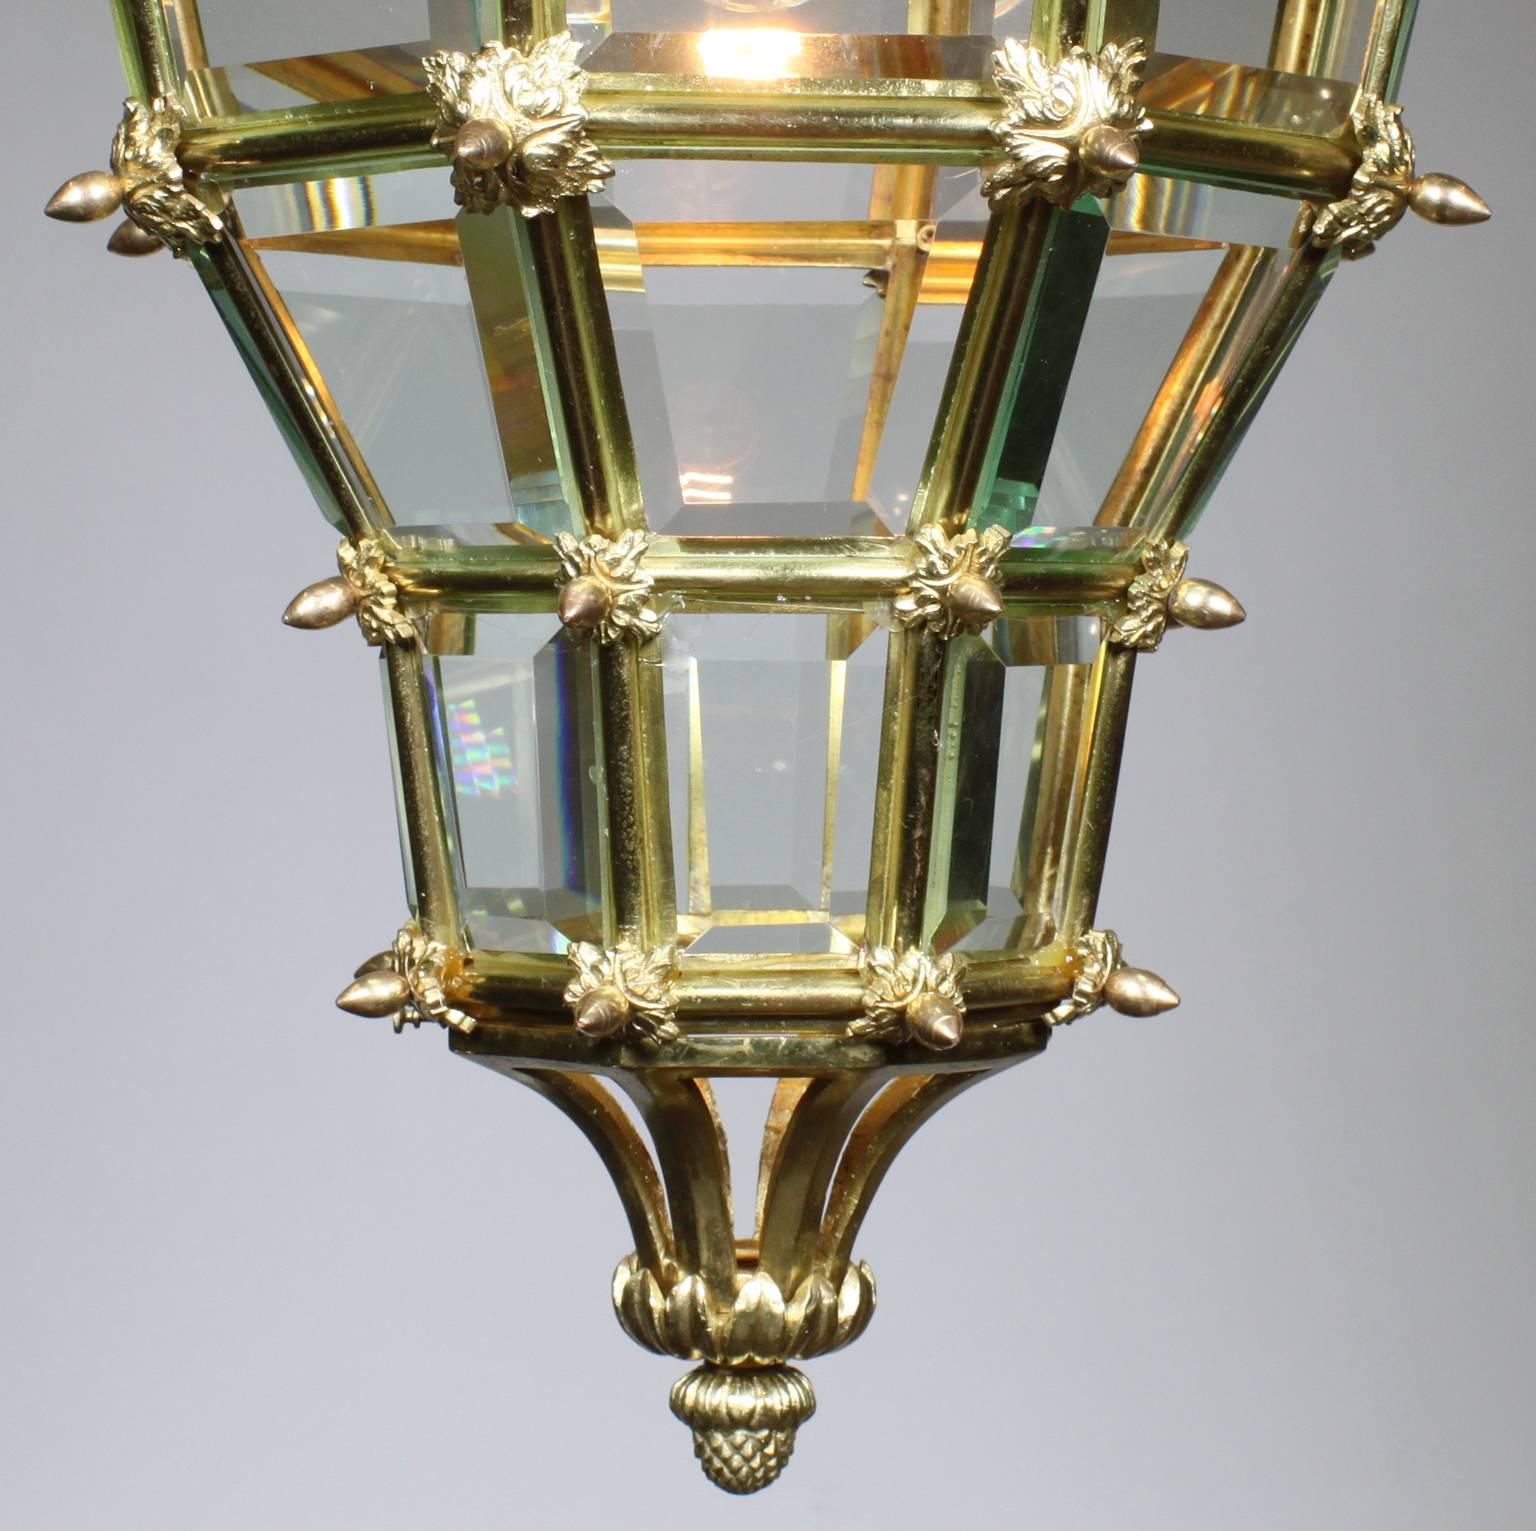 Beveled French Louis XIV Style Early 20th Century Gilt Bronze Versailles Style Lantern For Sale